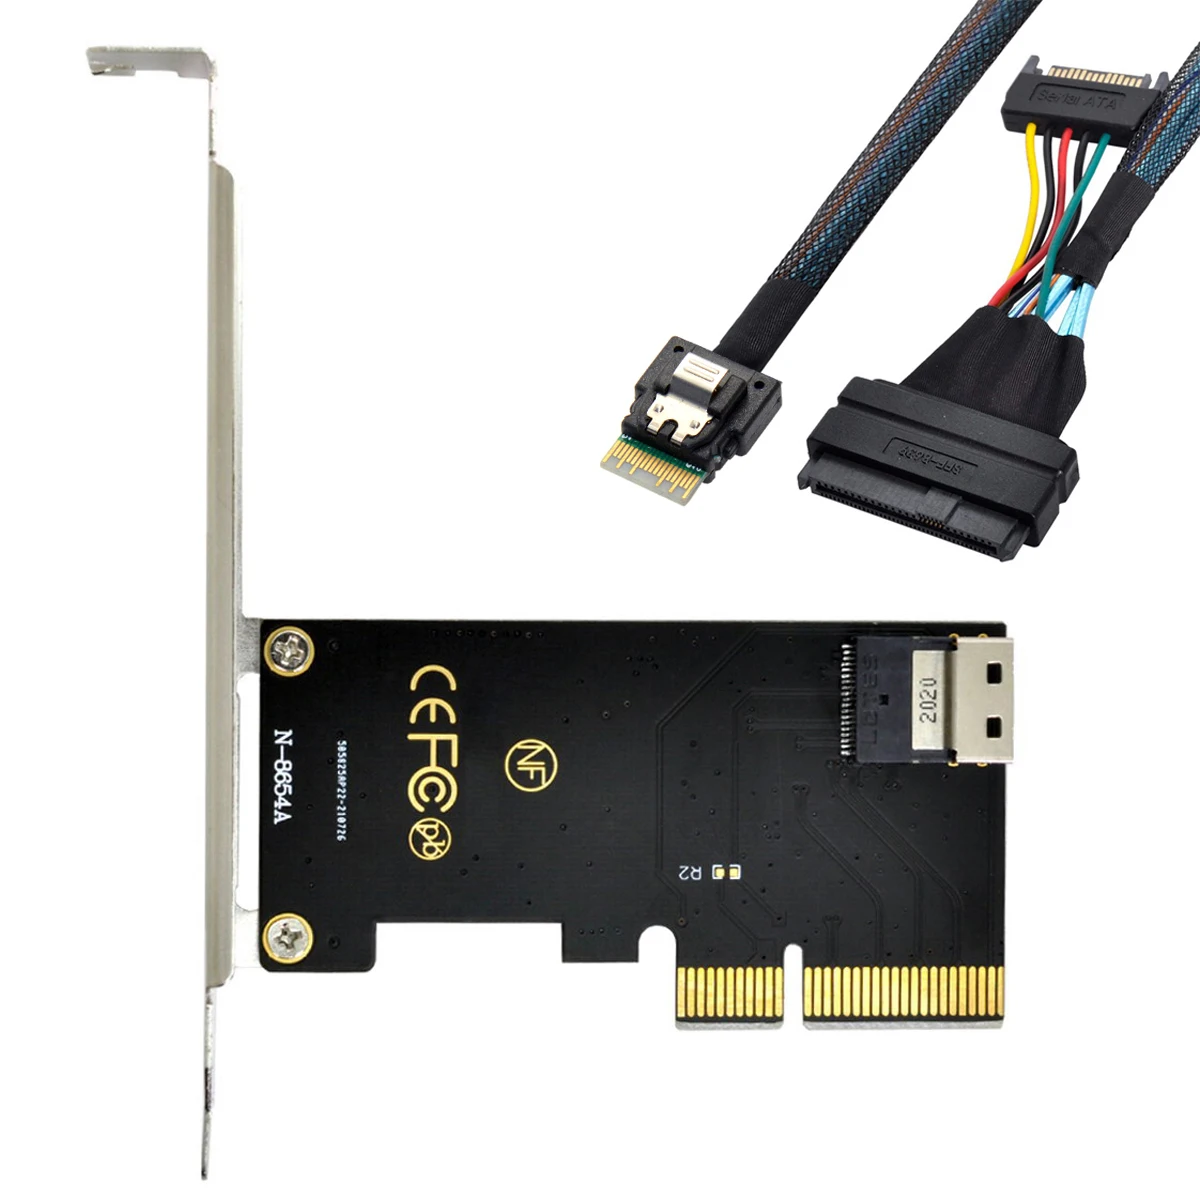 

Zihan Chenyang PCI-E 3.0 4.0 to SFF-8654 Slimline SAS Card Adapter and U.2 U2 SFF-8639 NVME PCIe SSD Cable for Mainboard SSD